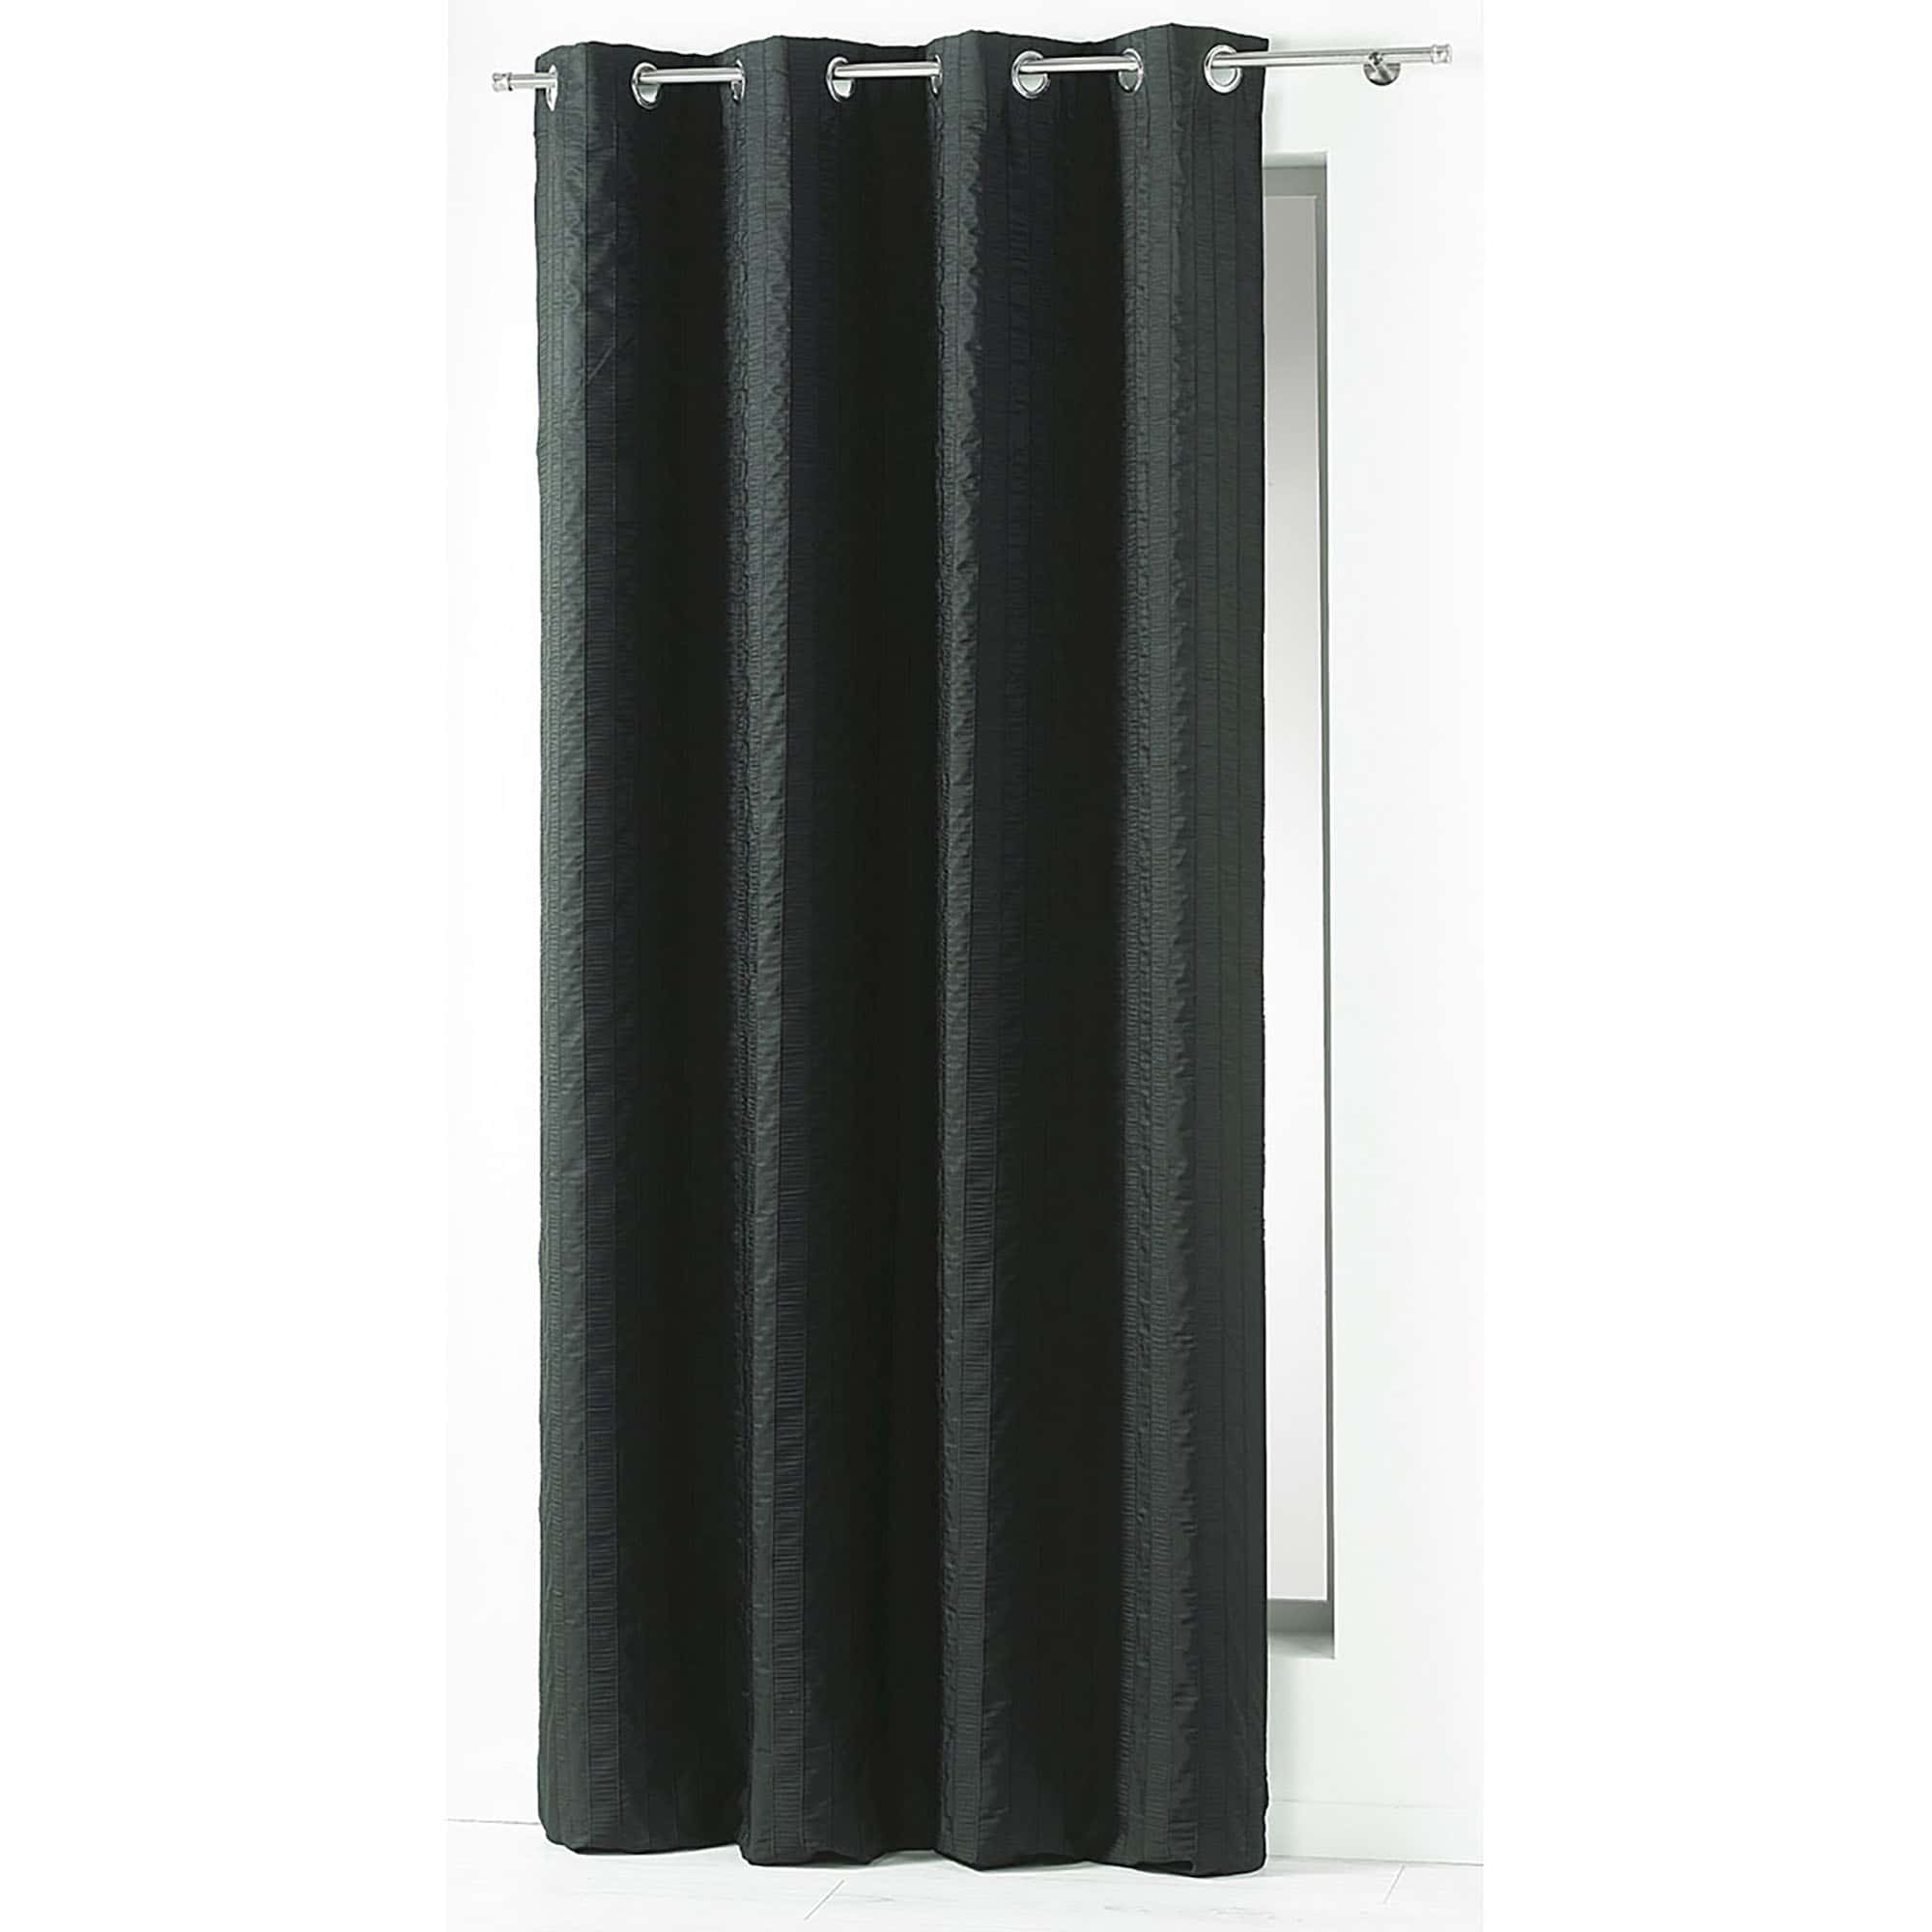 black with stripes textured window curtain 1 panel for large window